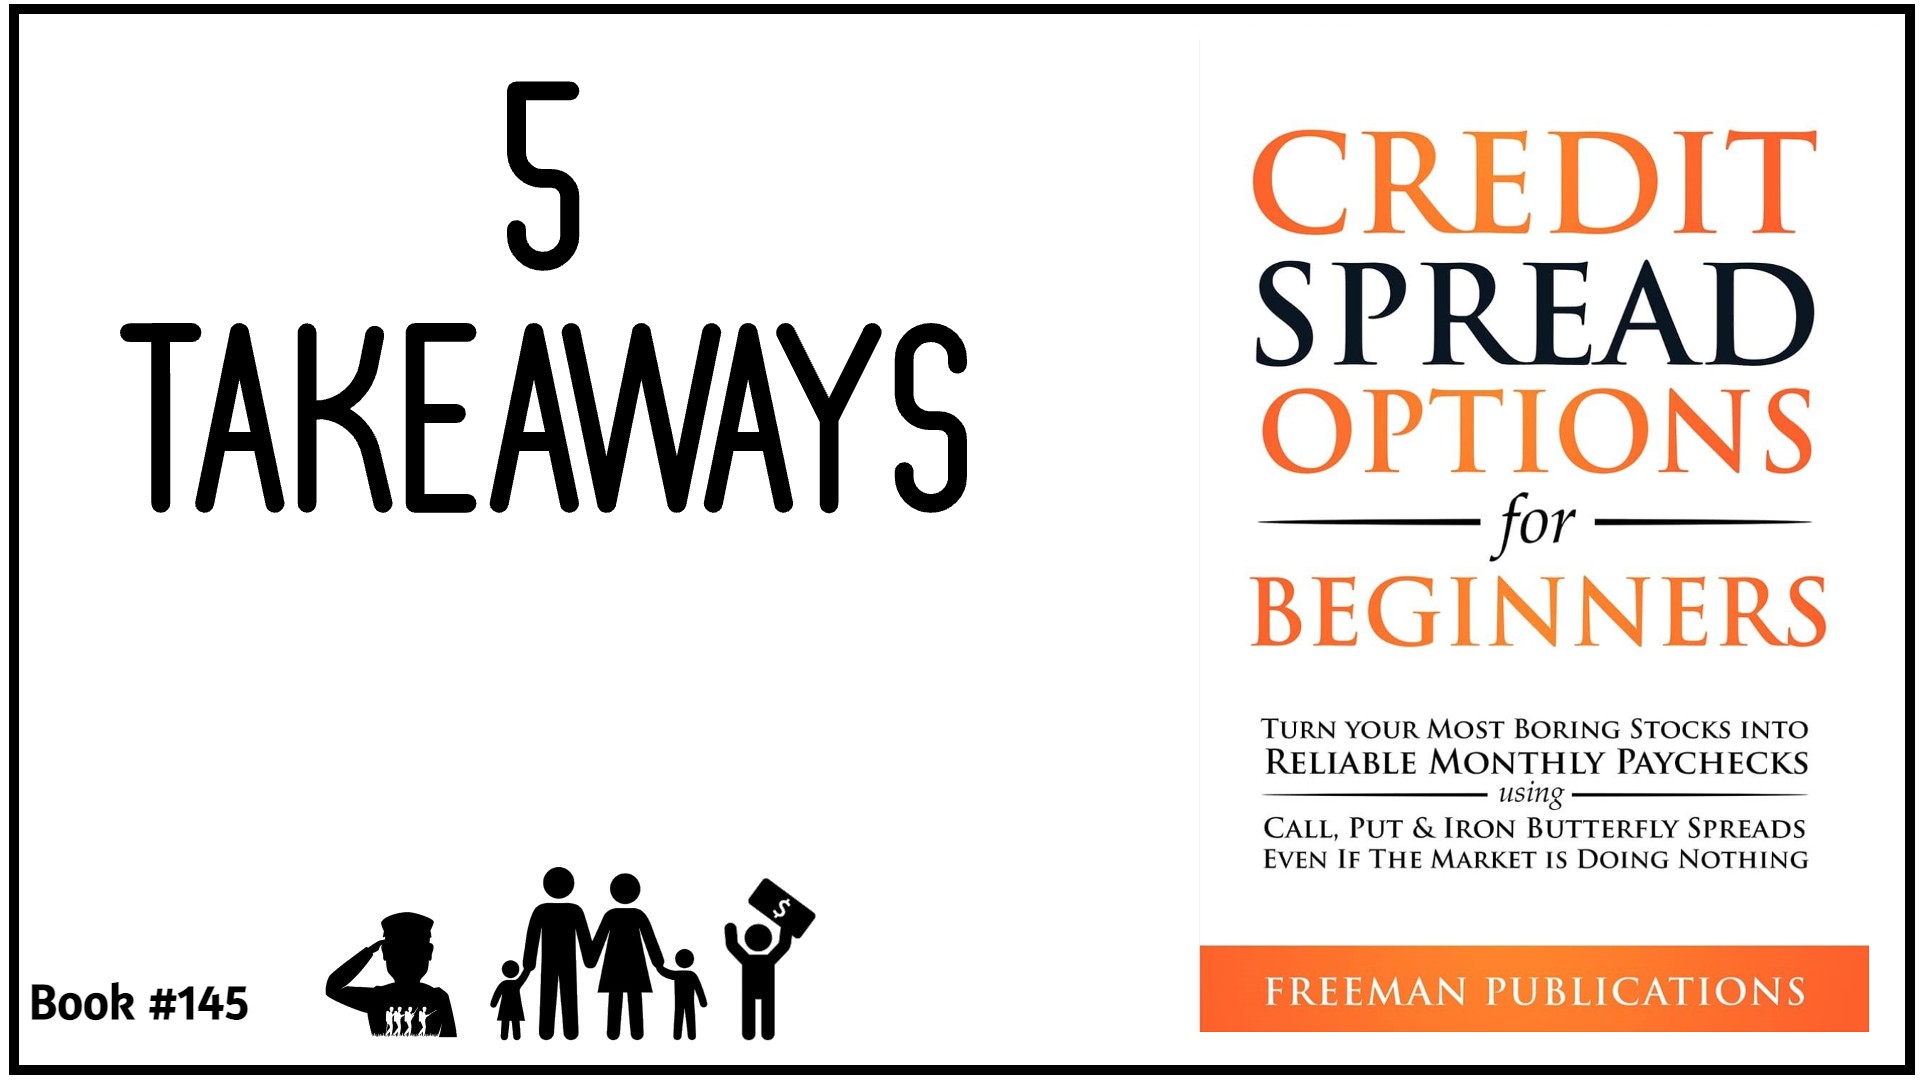 5 Takeaways from “Credit Spread Options for Beginners”